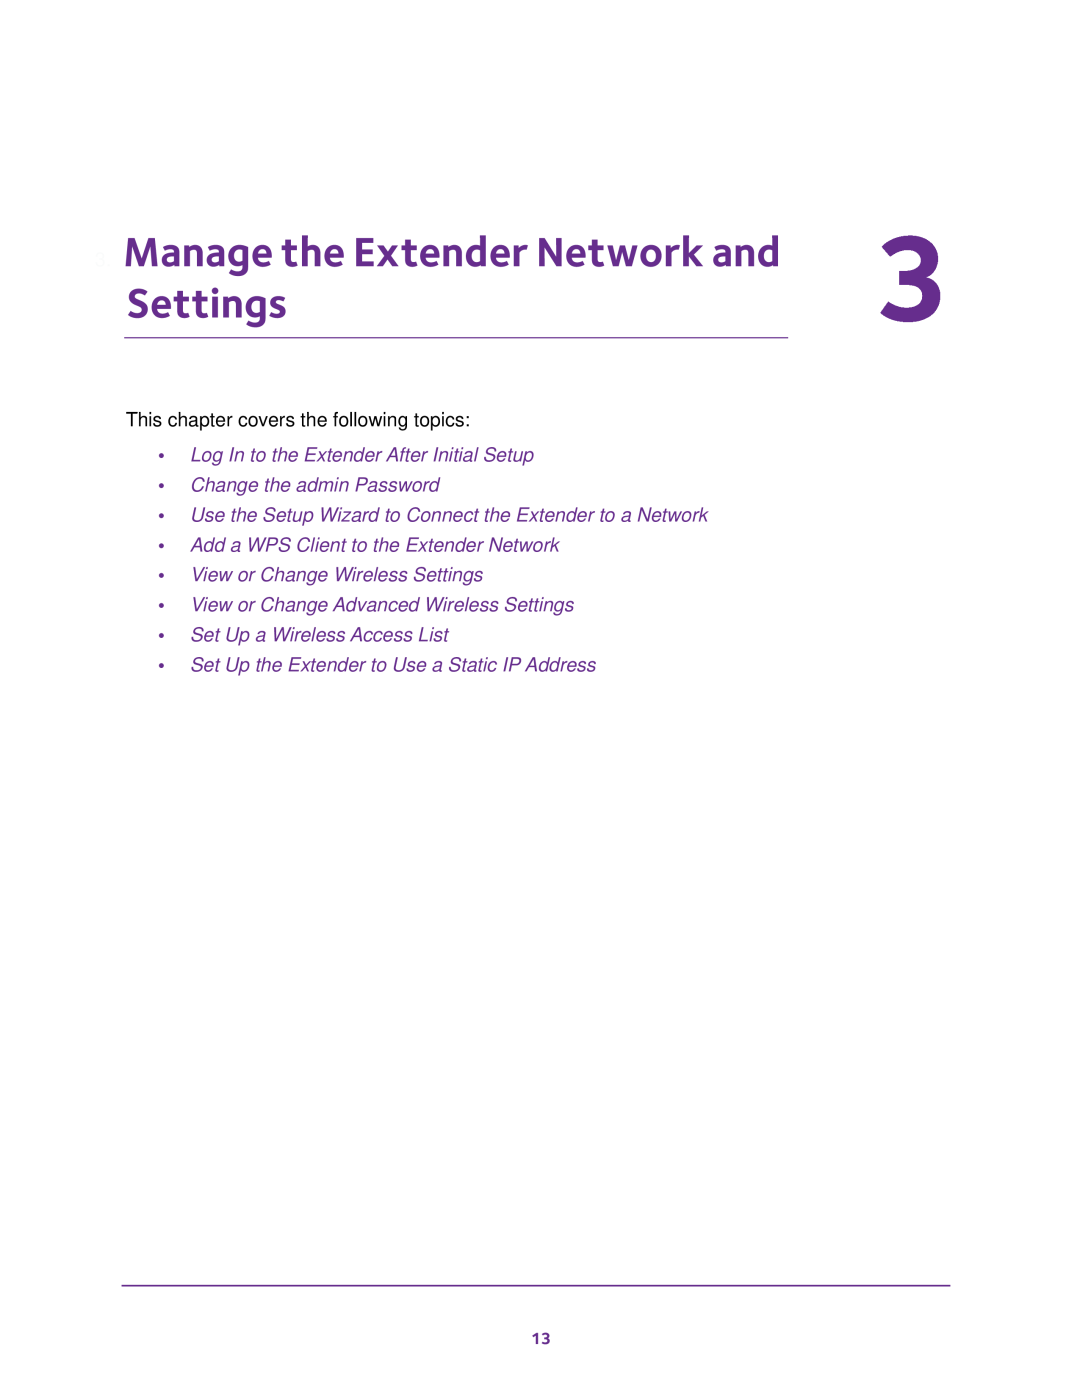 NETGEAR EX2700 Settings, Manage the Extender Network and, Use the Setup Wizard to Connect the Extender to a Network 